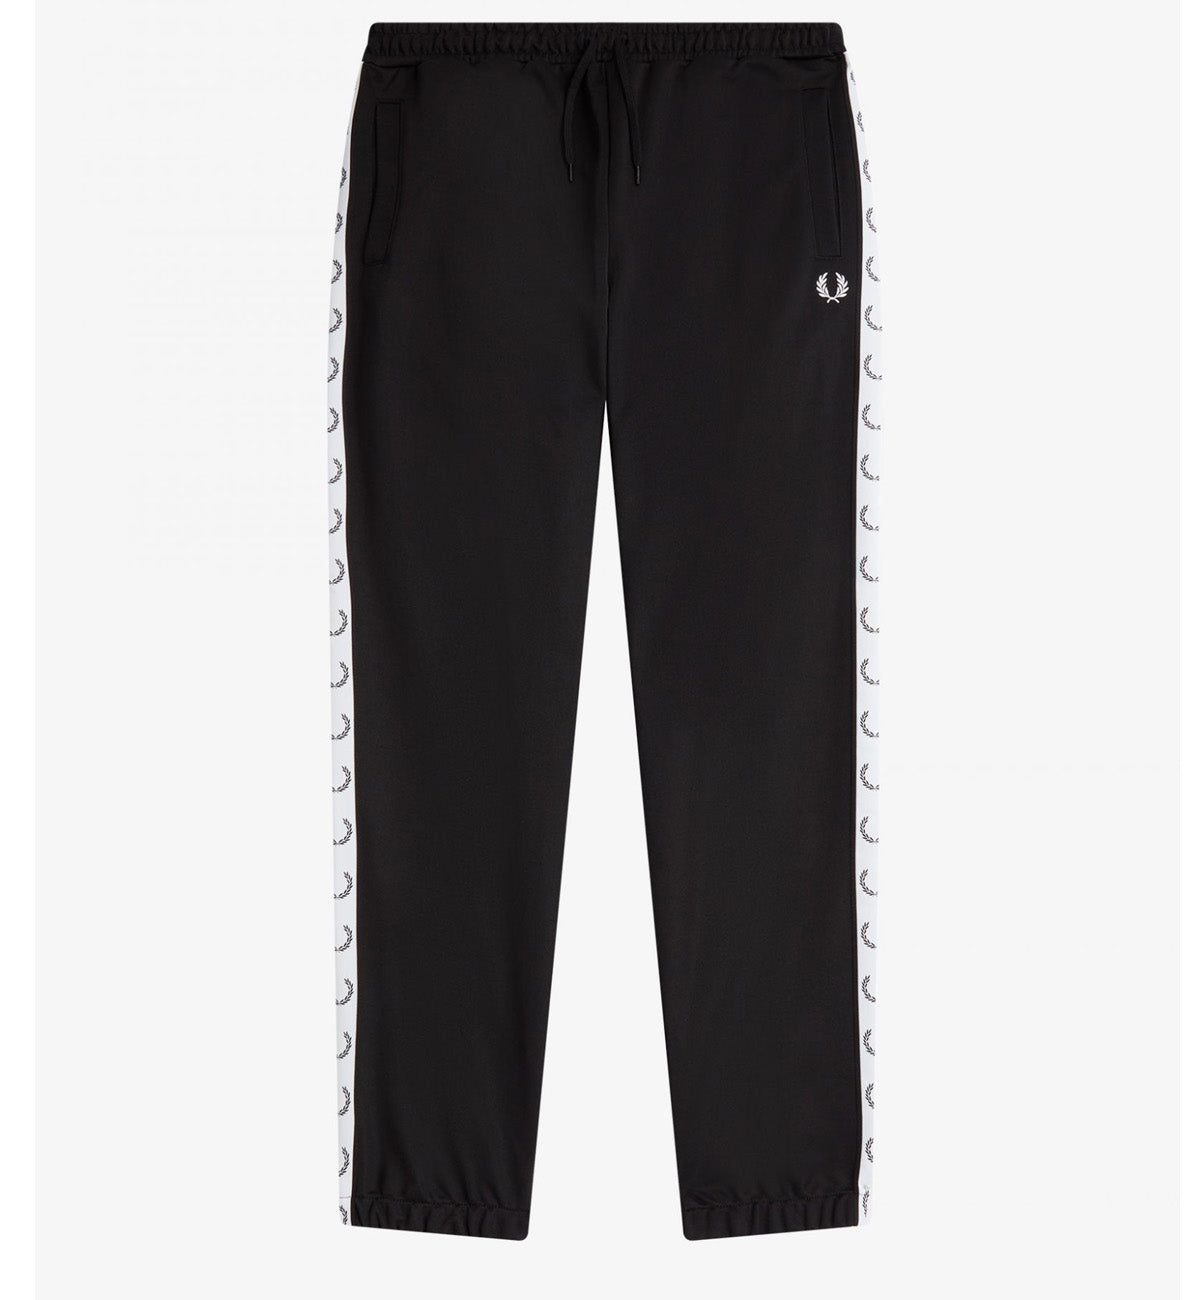 Fred Perry Taped Track Pant (Black)